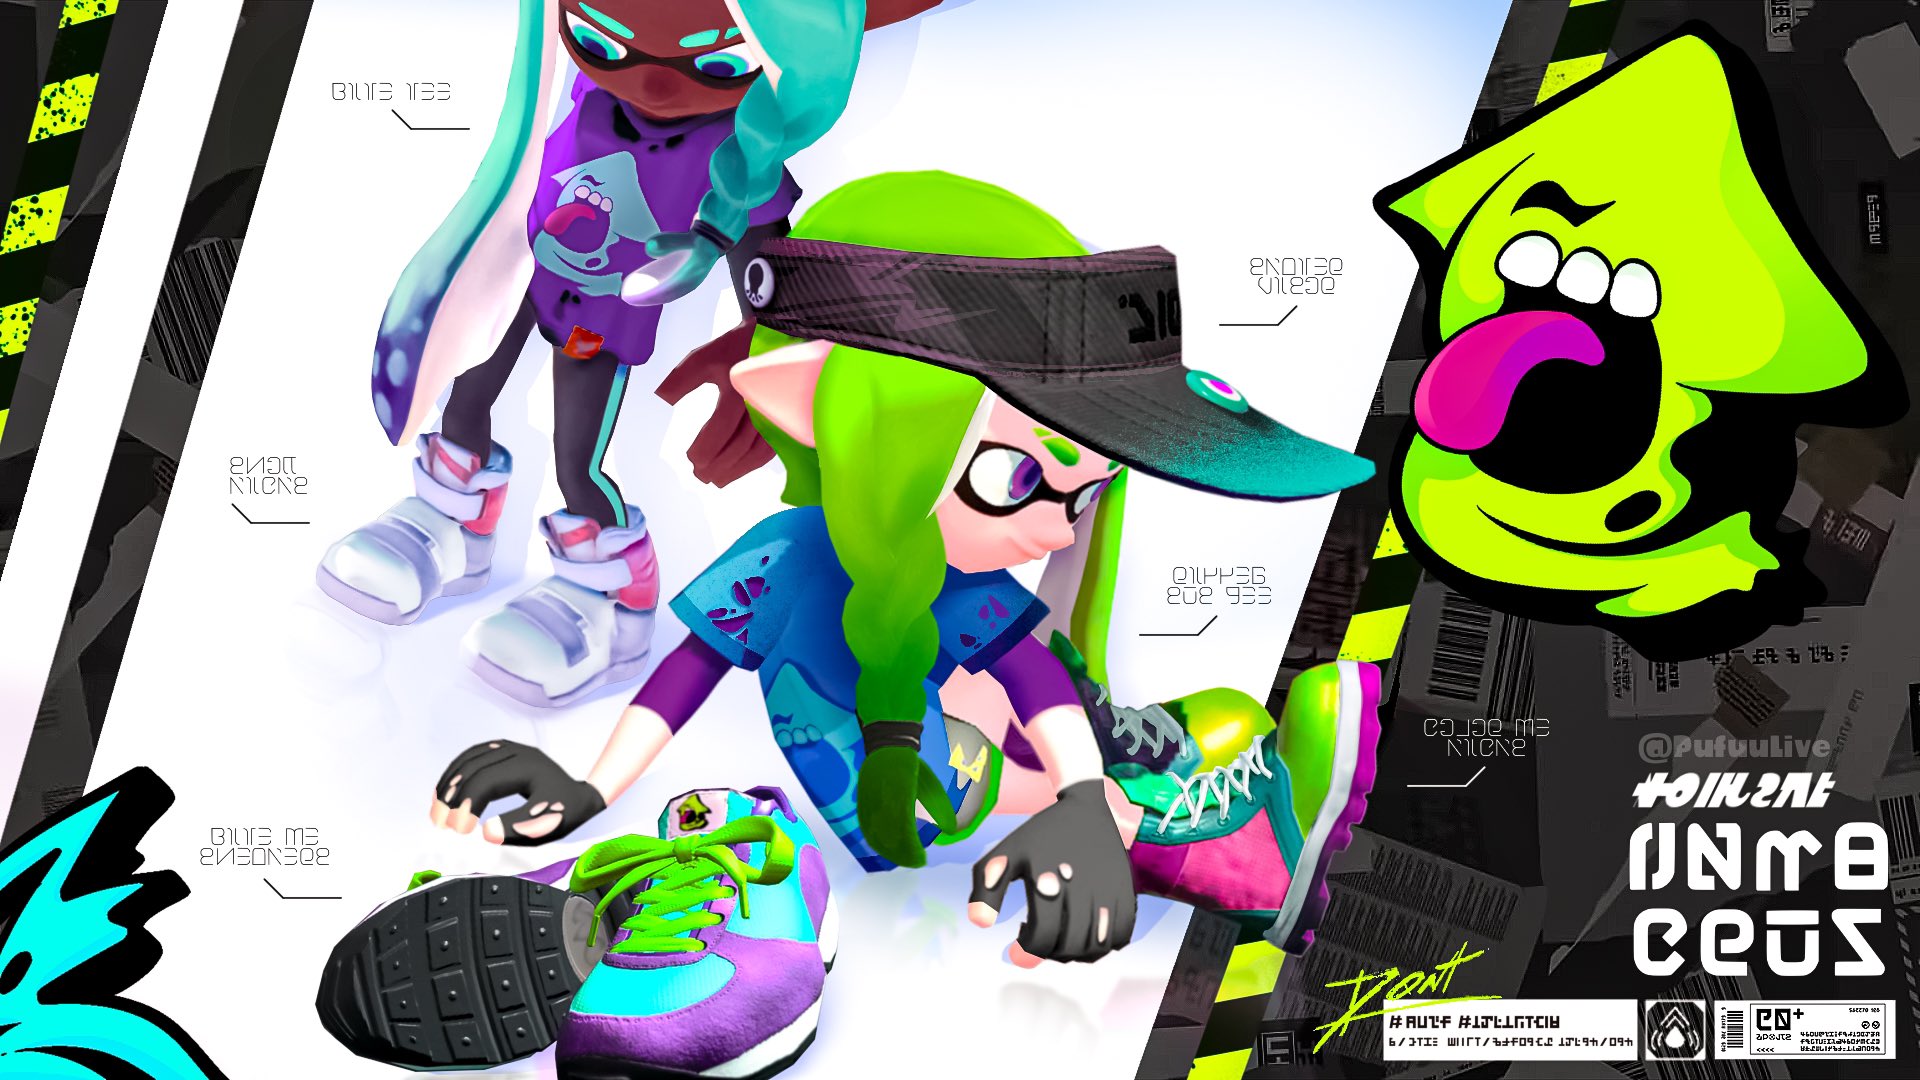 Pufuu New Splatoon 3 Gear Brand Concept Screaming Ink This Skater Apparel Brand Has The Freshest Gear Built To Endure The Scorching Deserts Of The Splatlands Splatoon スプラトゥーン T Co U2y6ifru51